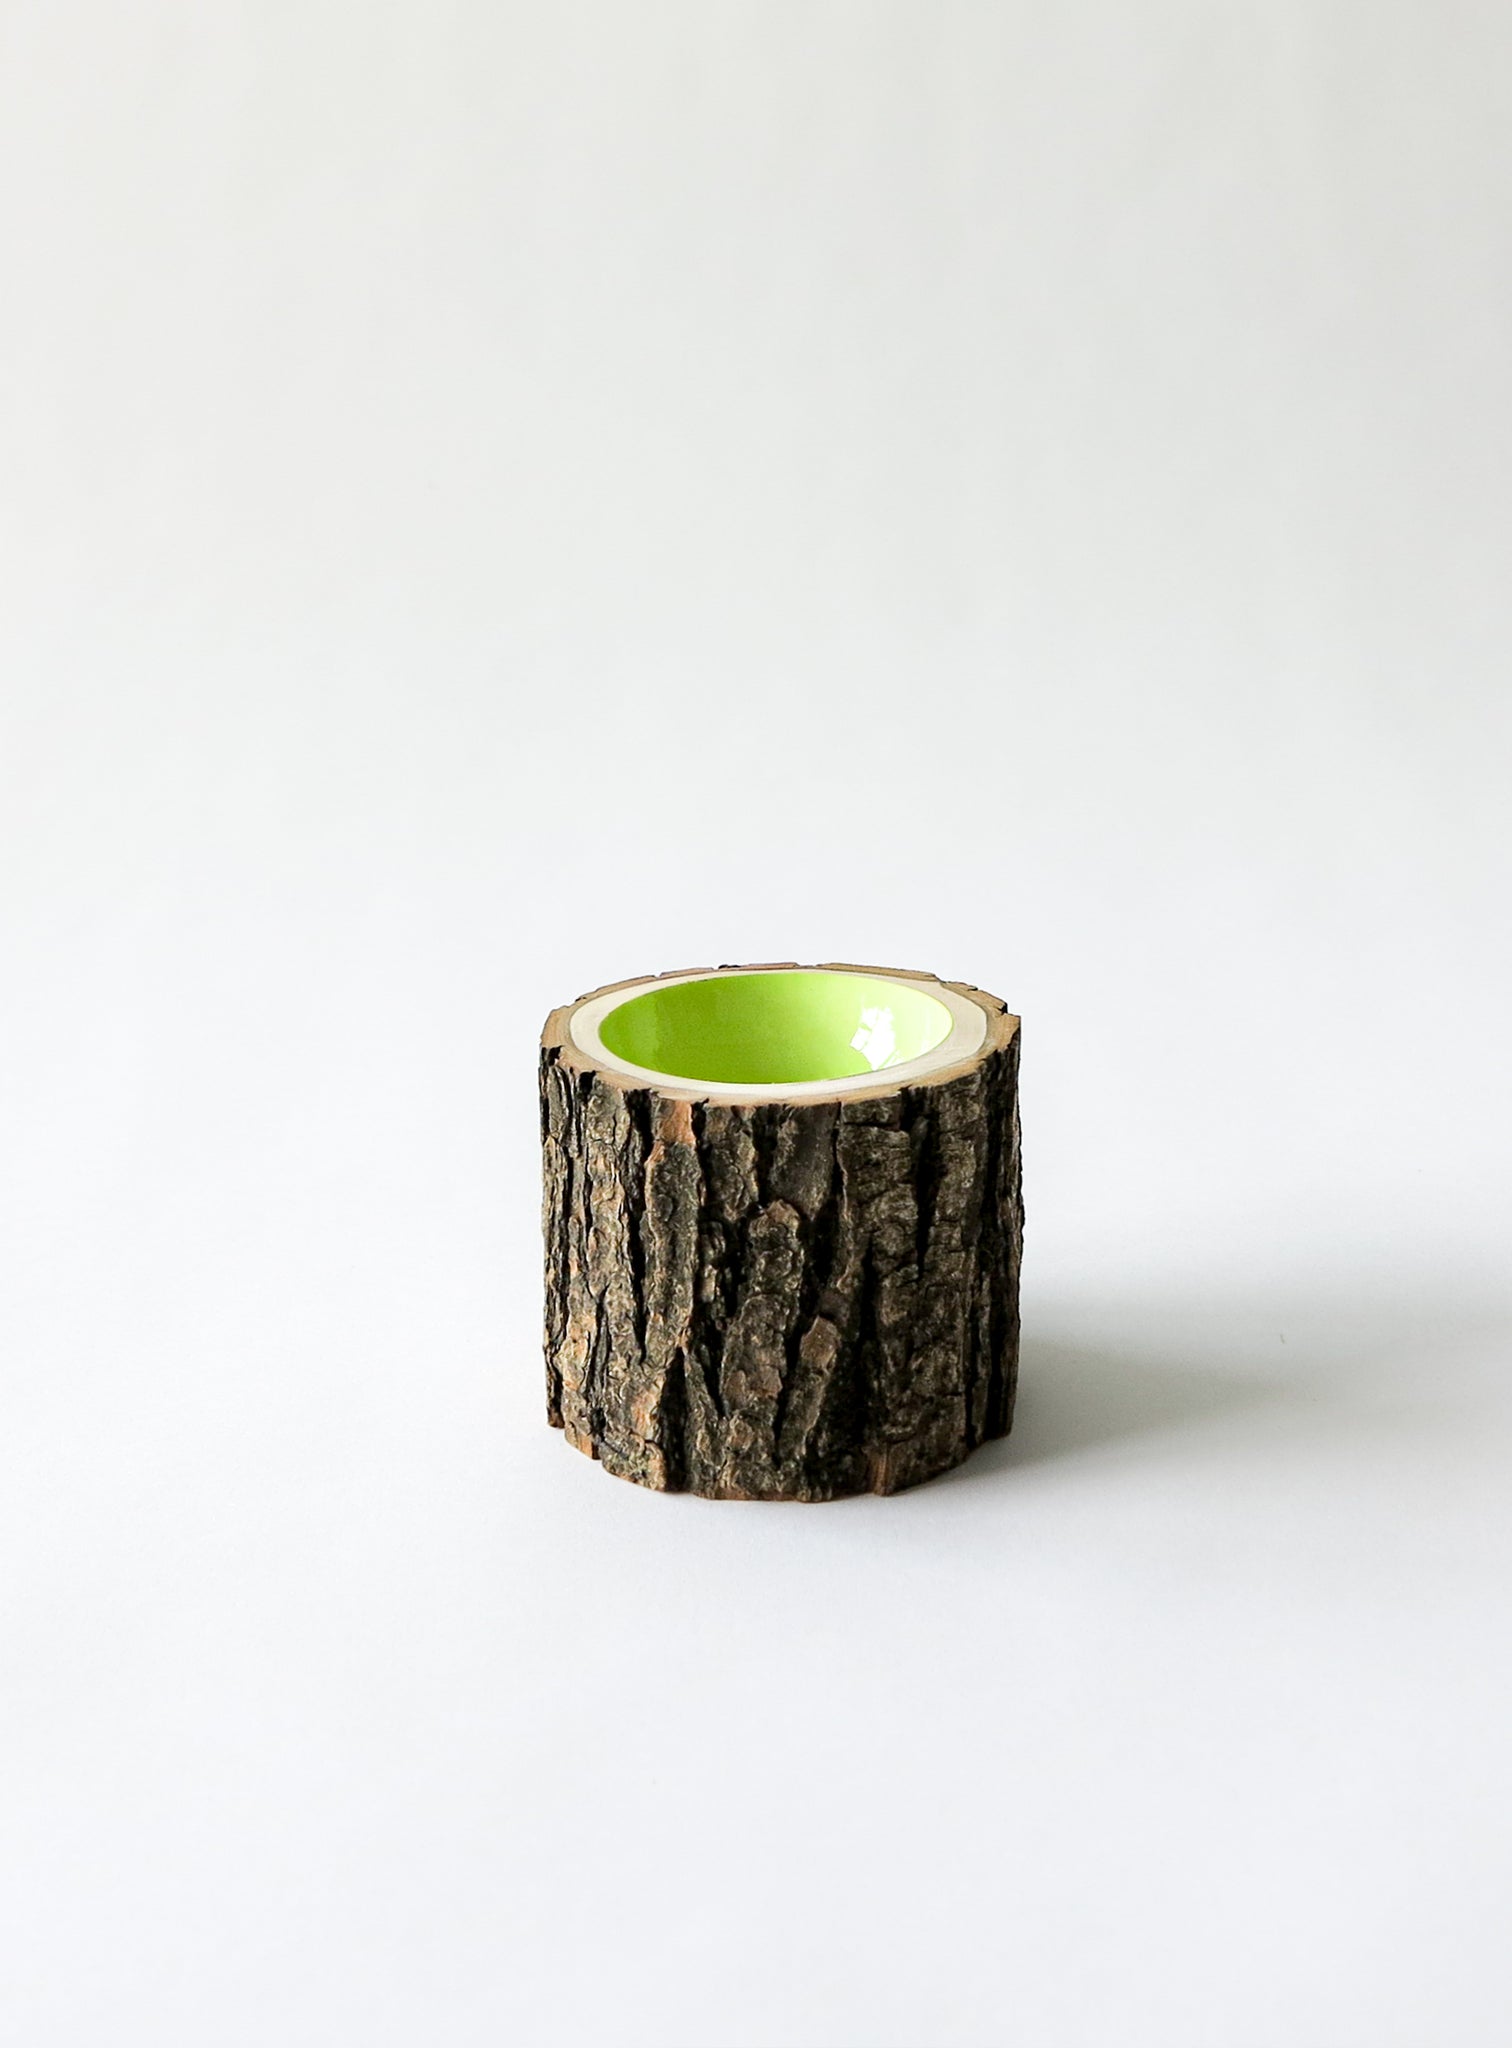 Size 2 Celery Log Bowl - small wooden bowl with rough bark, glossy interior is a bright green colour.